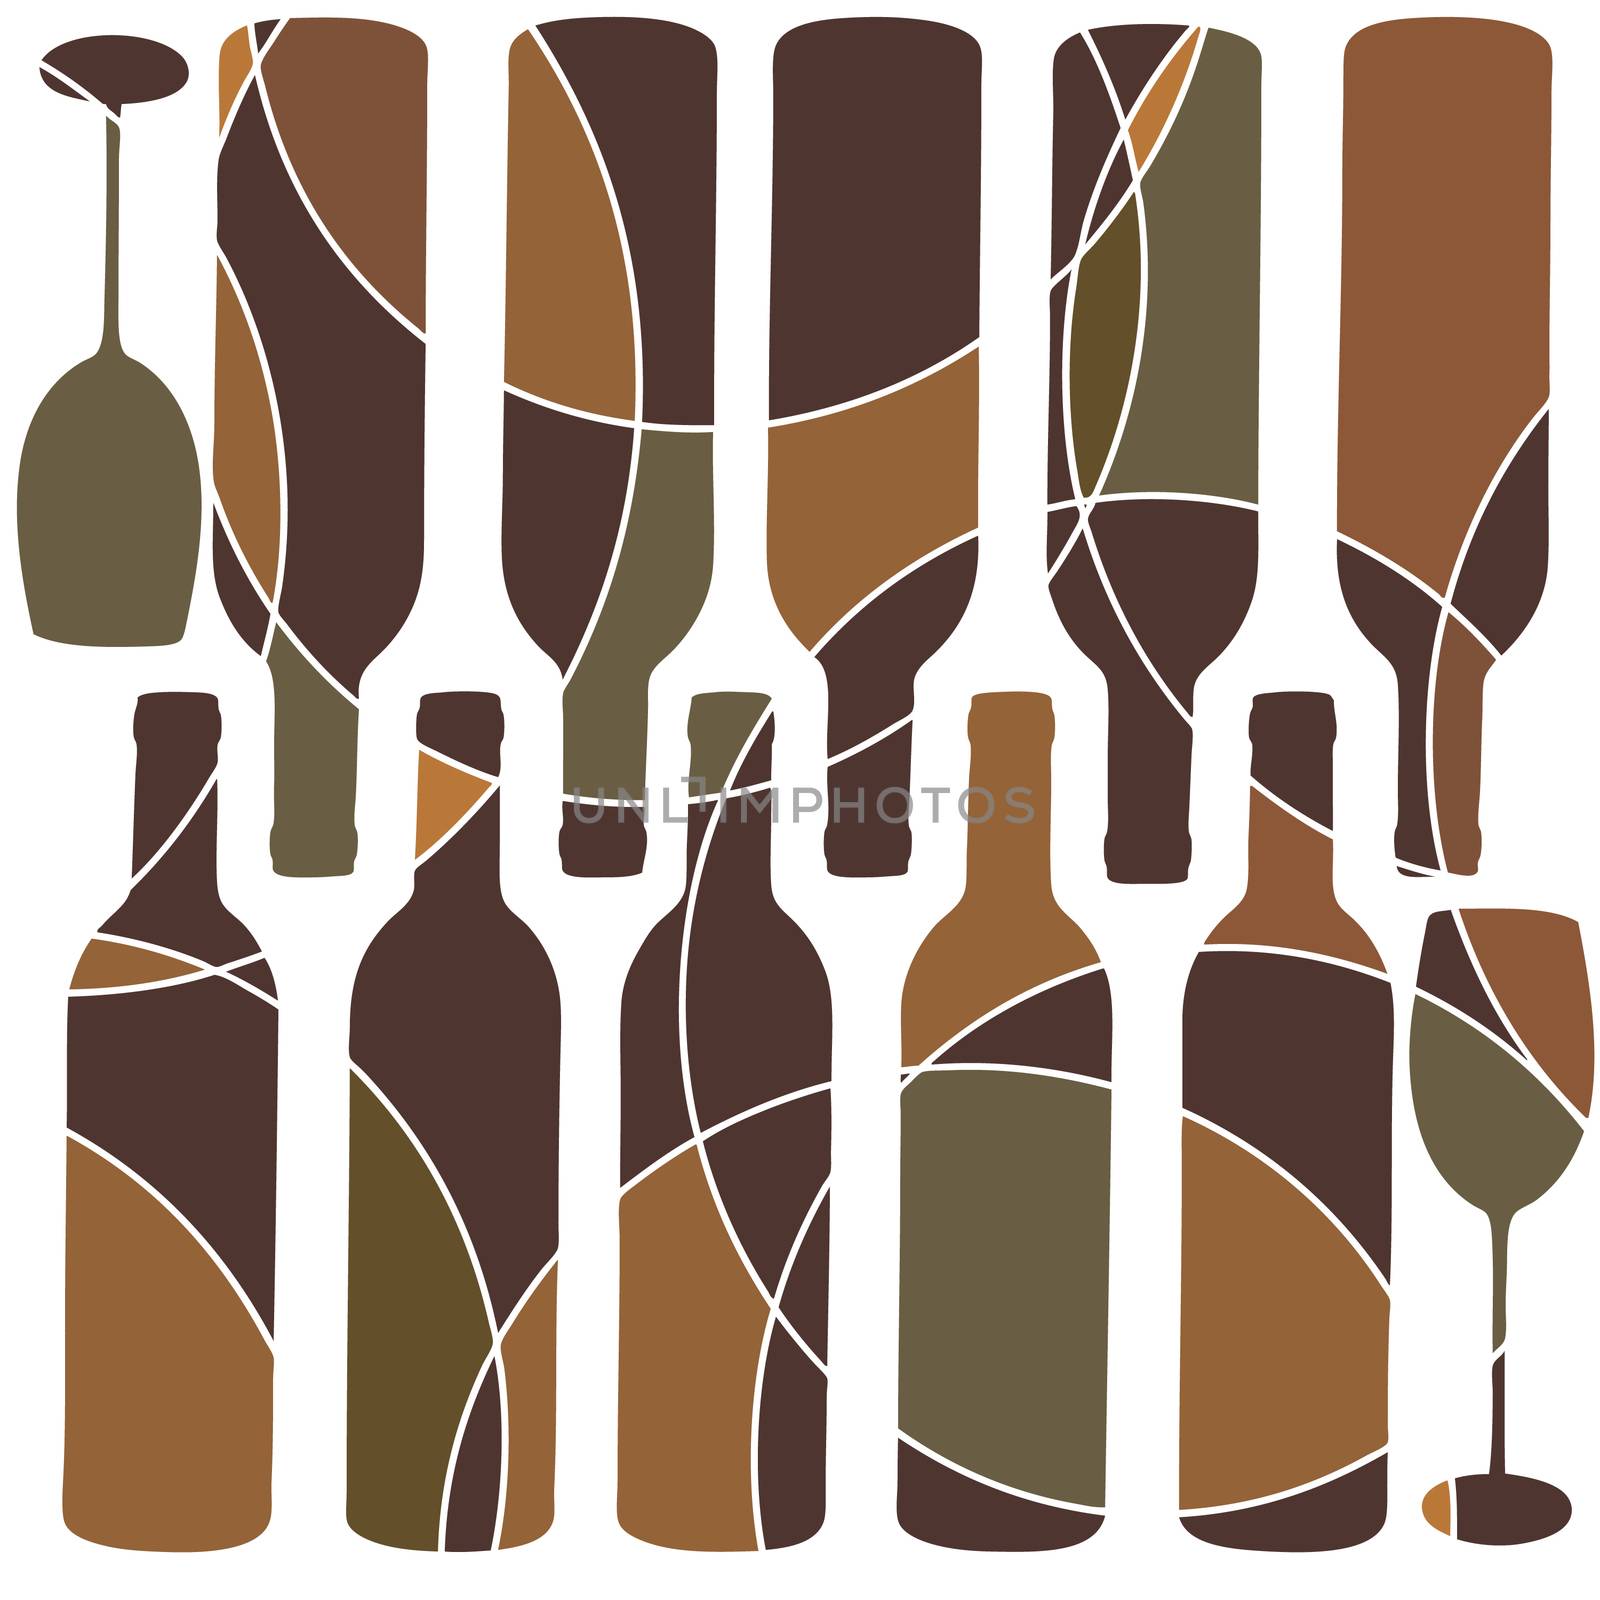 an abstract brown wine bottle and glass design featuring circues and segments